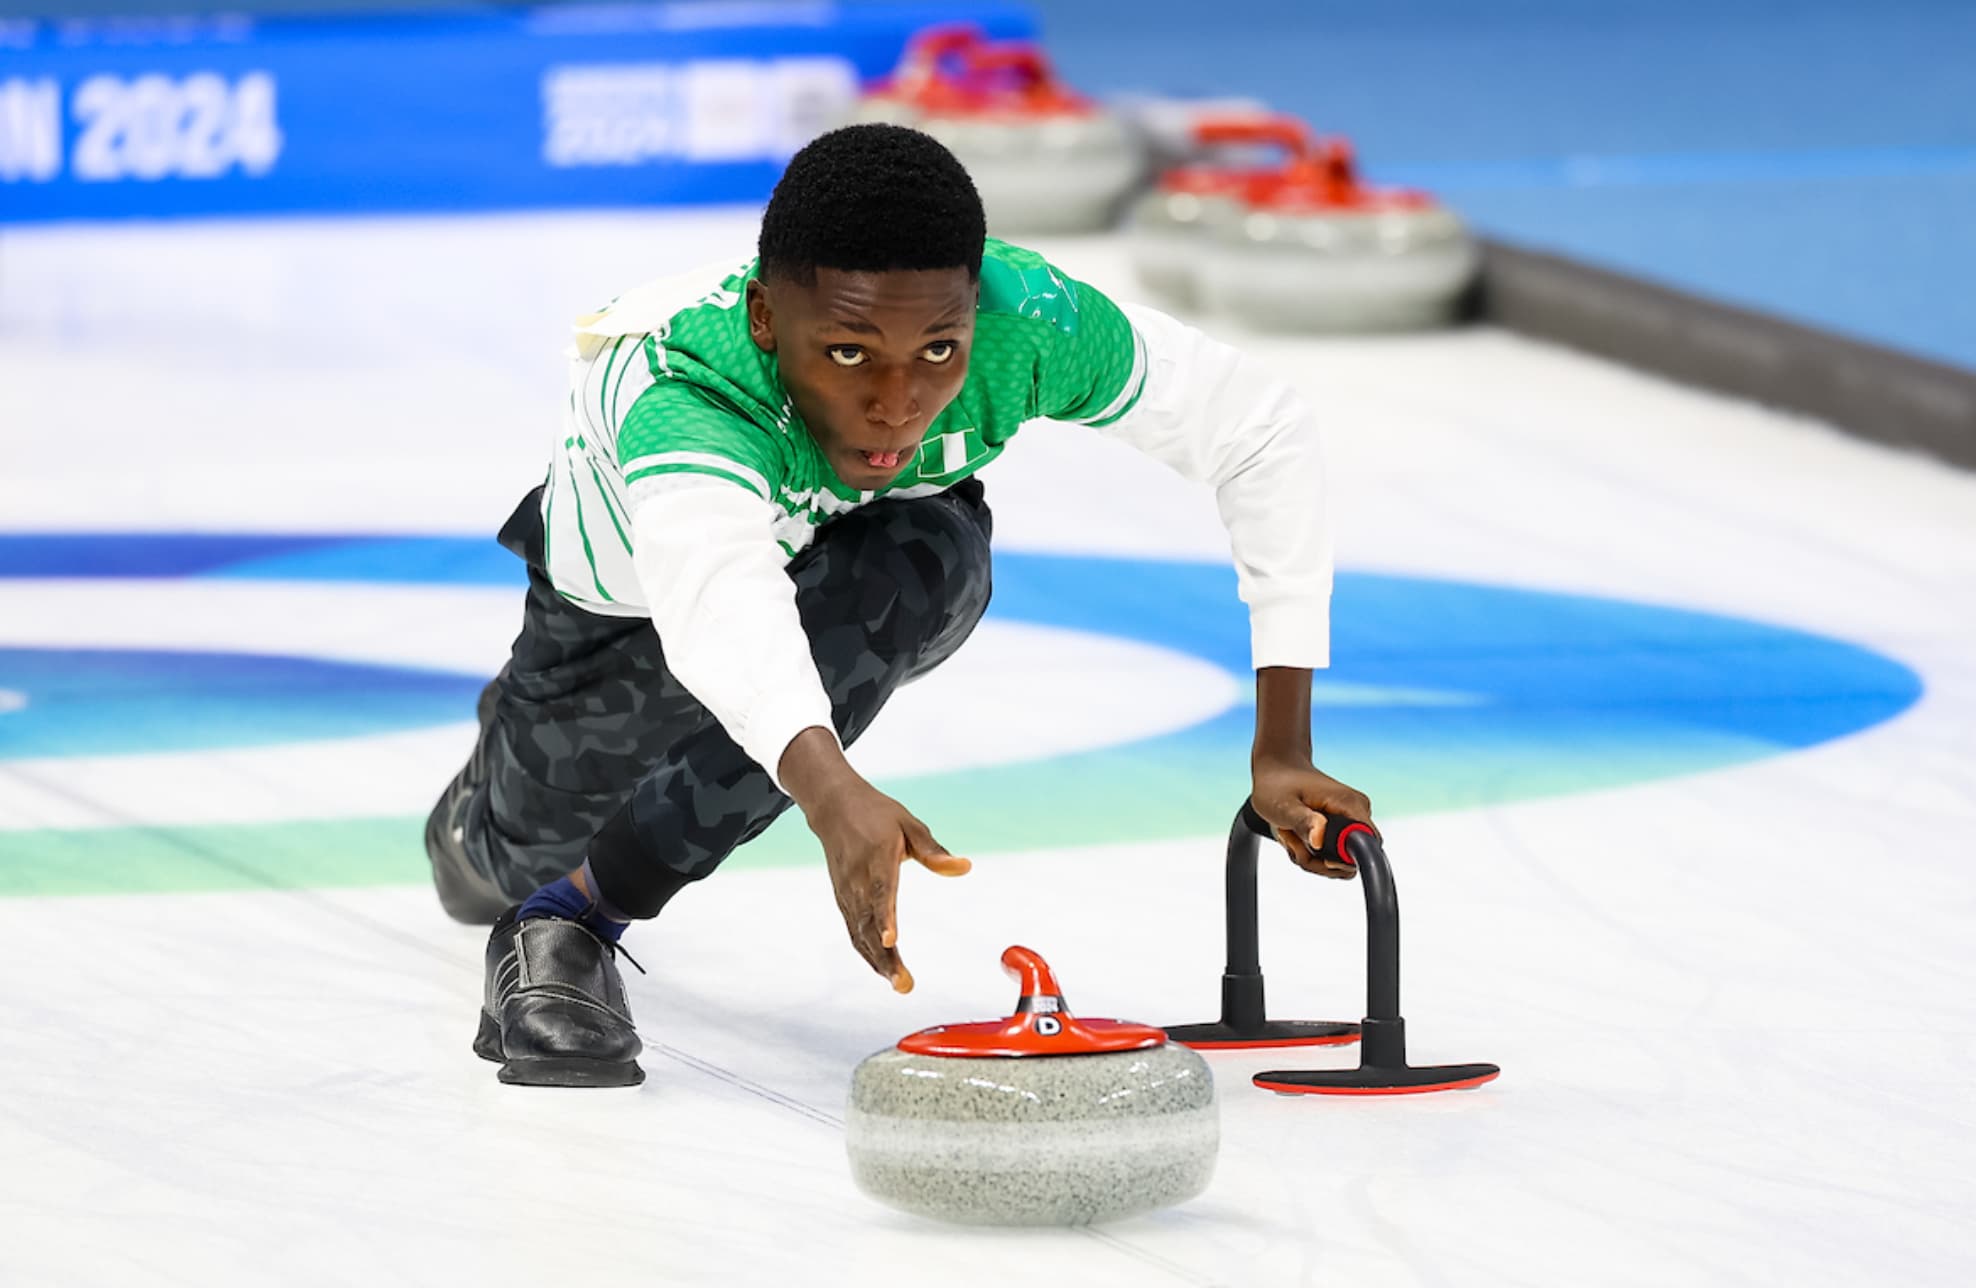 “Scientists don't know what makes the stones curl across the ice in Olympic curling and despite a number of studies, it remains an unsolved mystery for physicists.”